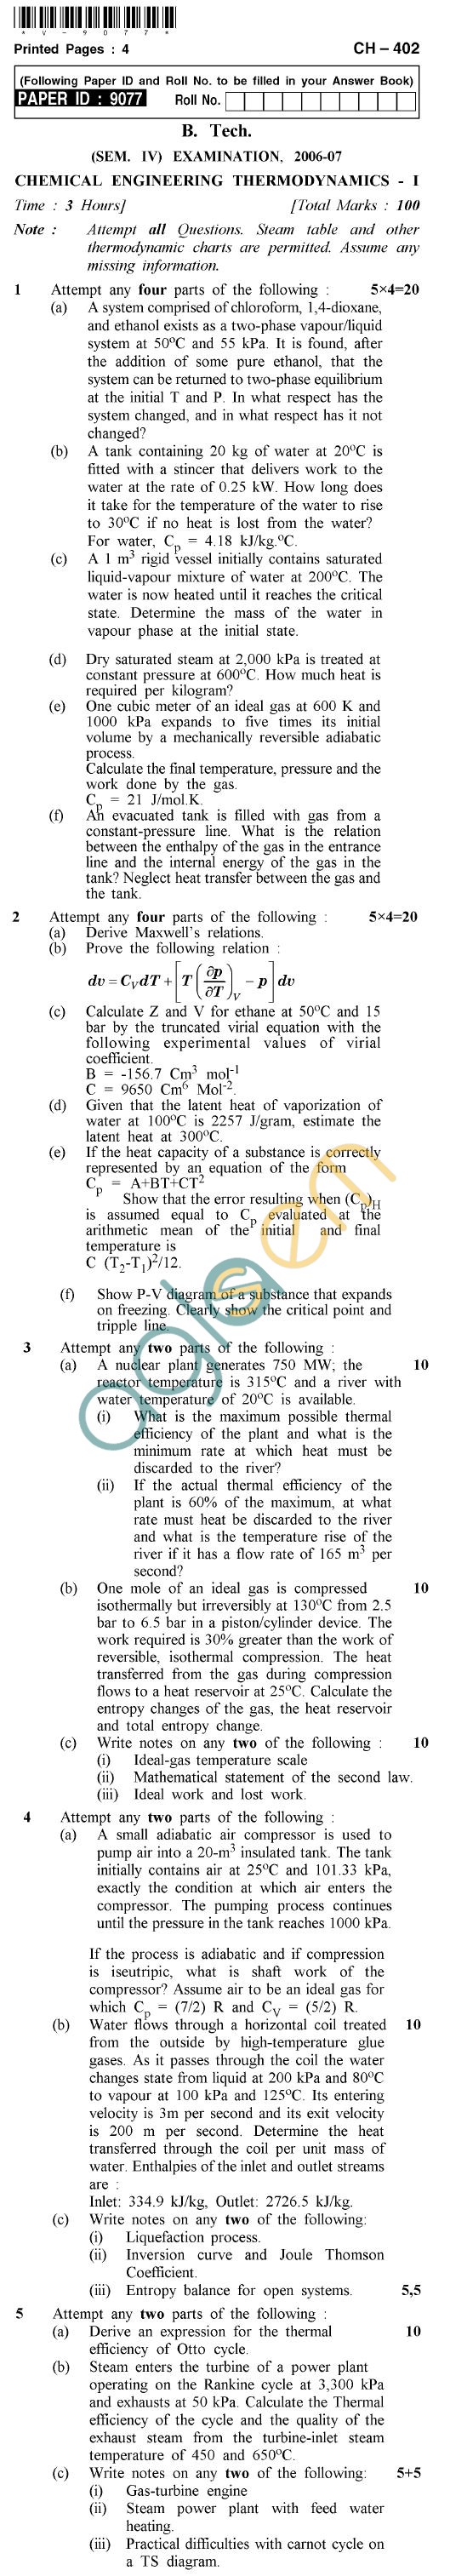 UPTU B.Tech Question Papers - CH-402 - Chemical Engineering Thermodynamics-I